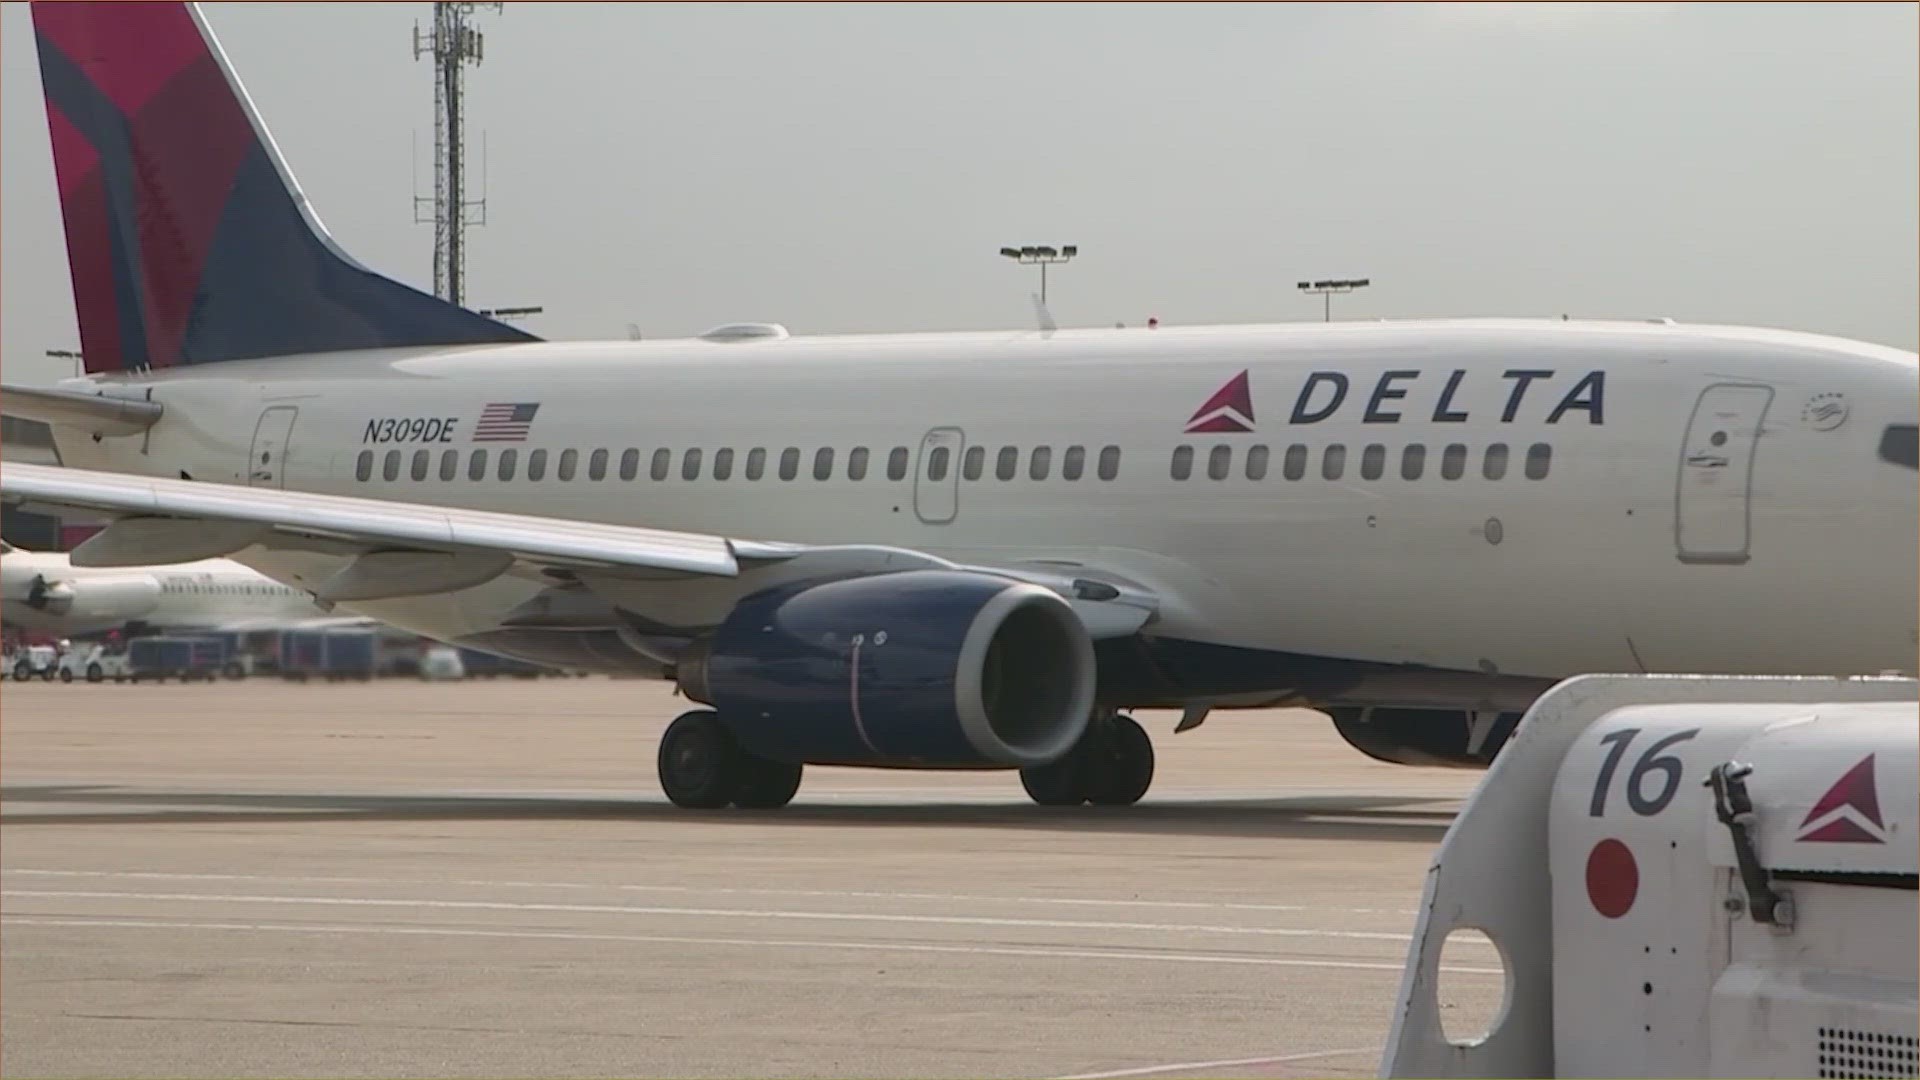 The increase is set to start this summer, with a new minimum wage of $19 an hour, according to the airline.